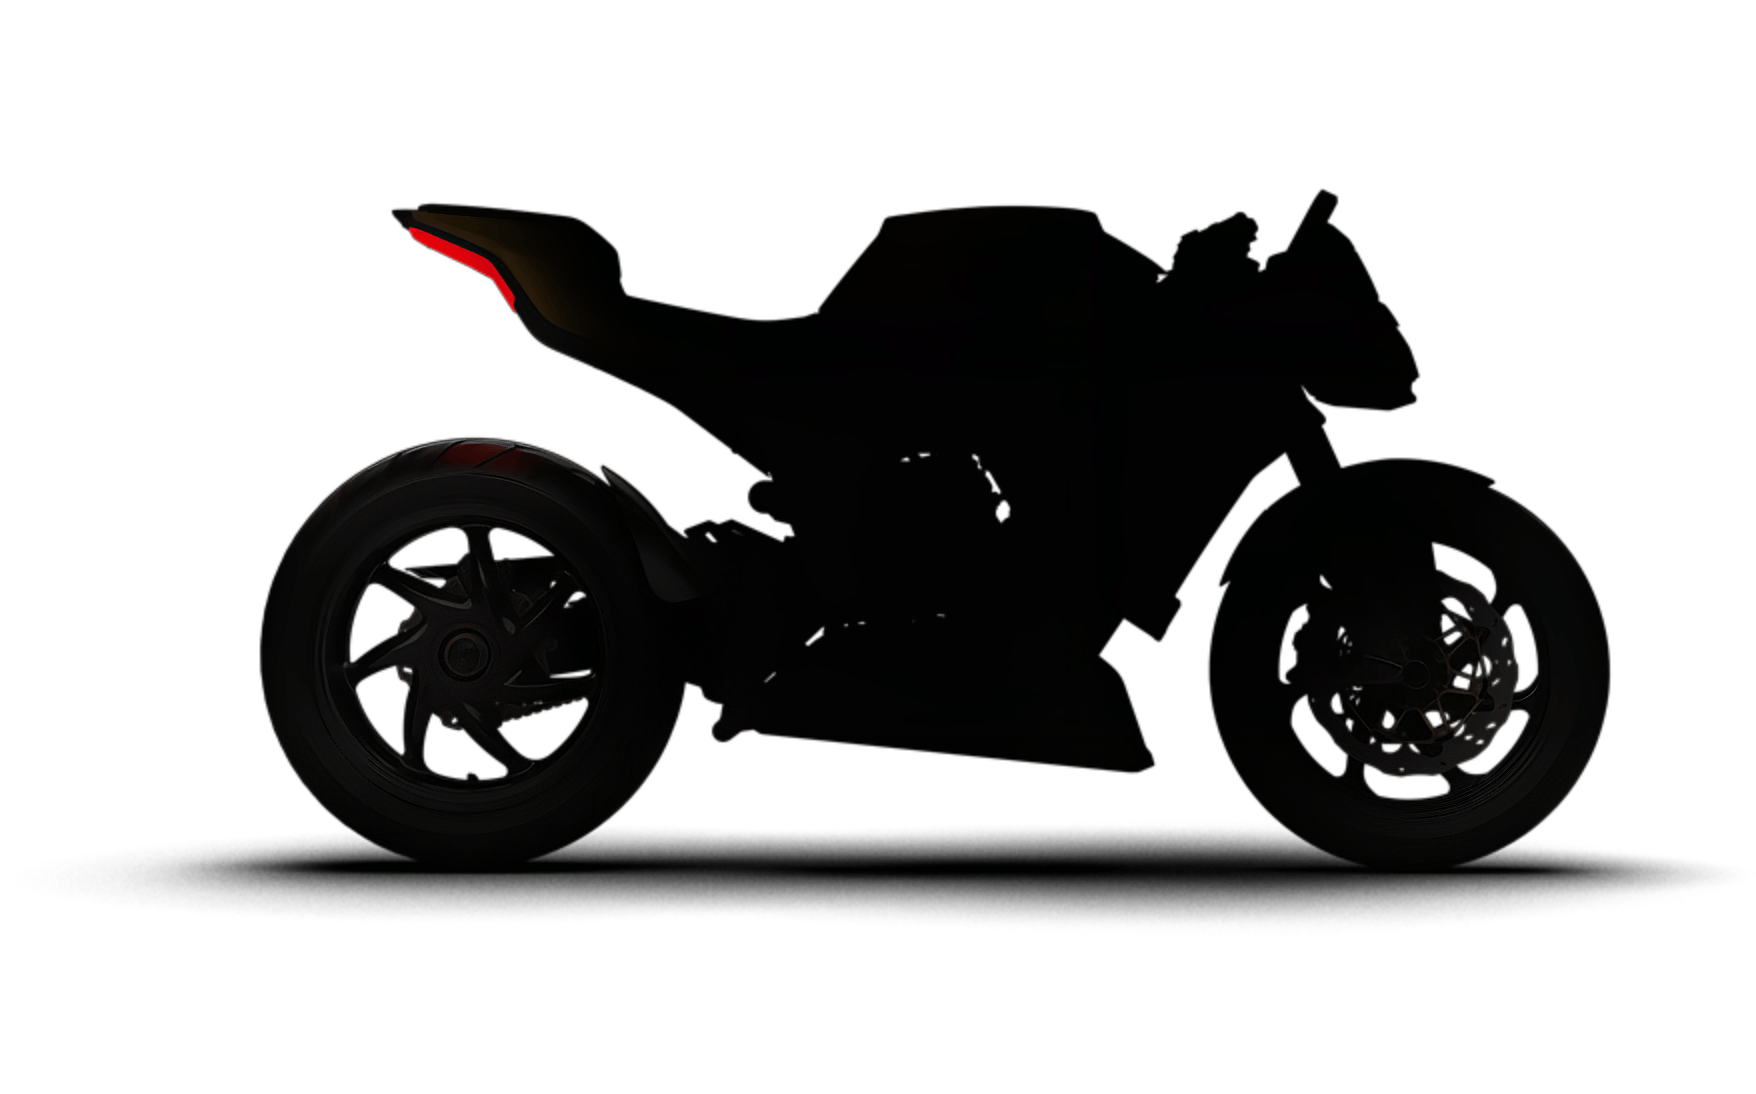 Damon HyperFighter Colossus - electric streetfighter announced
- also in the MOTORCYCLES.NEWS APP